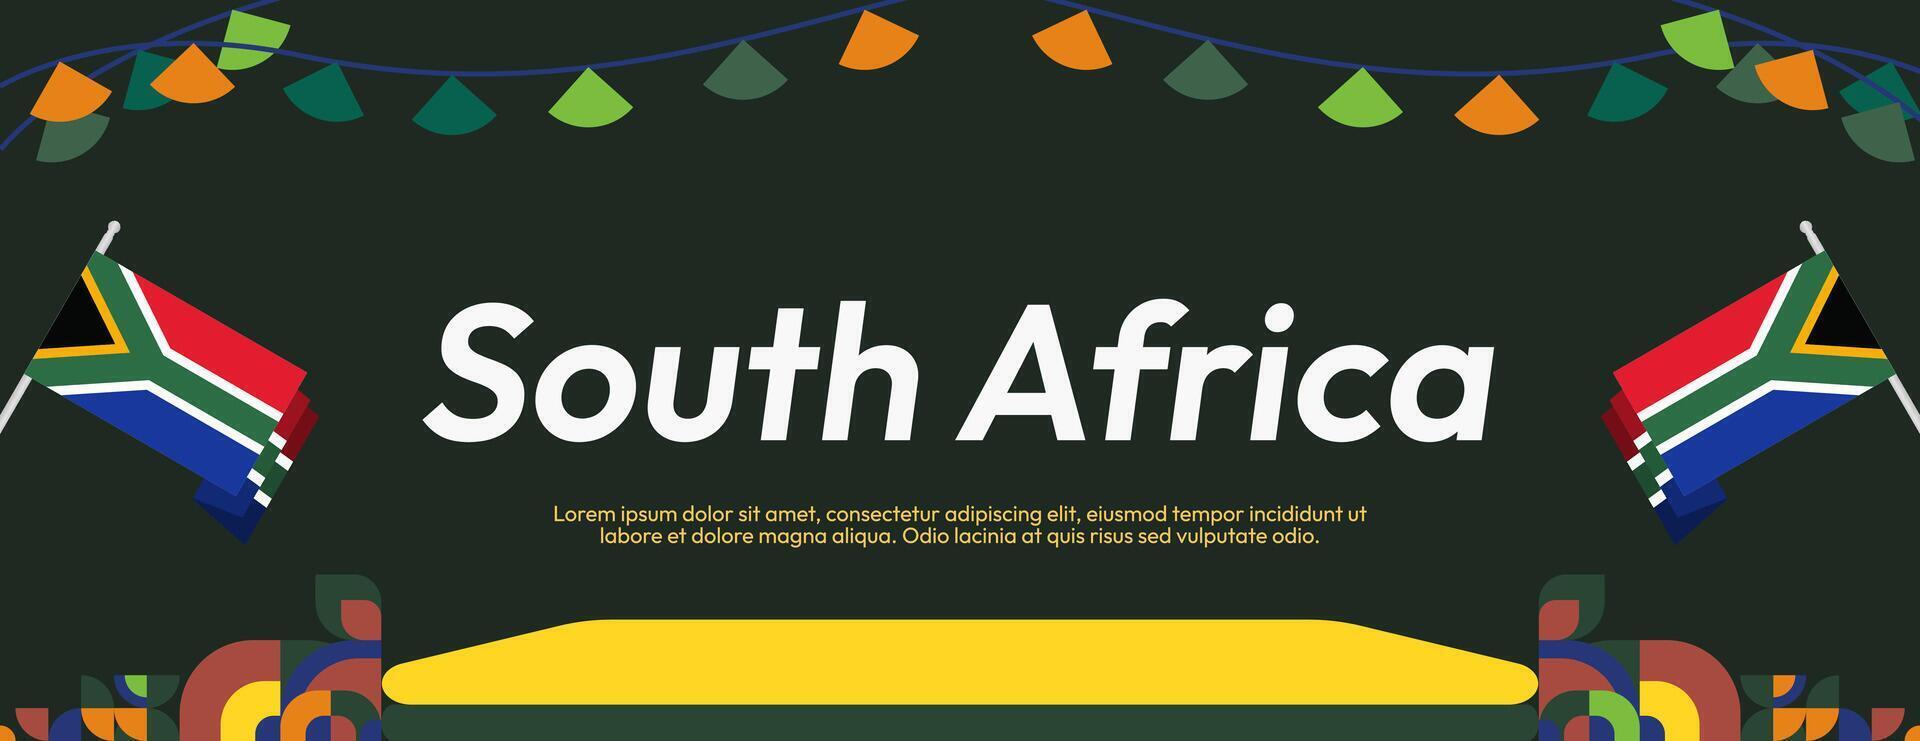 South Africa National Independence Day wide banner. Modern geometric abstract background in colorful style for South Africa day. South African Independence greeting card cover with country flag. vector